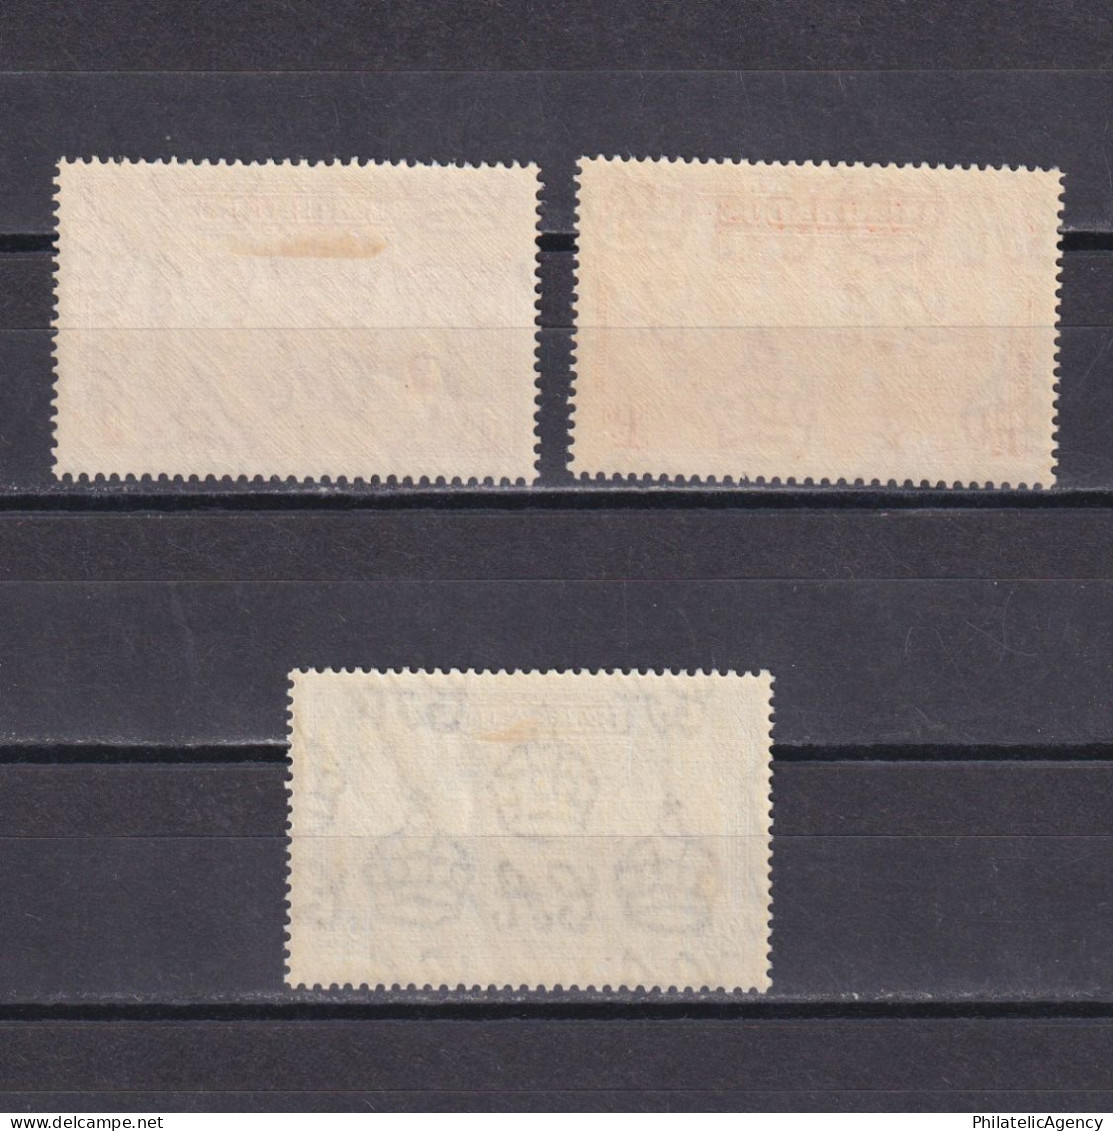 BARBADOS 1939, SG #257-260, Part Set, Tercentenary Of General Assembly, MH - Barbades (...-1966)